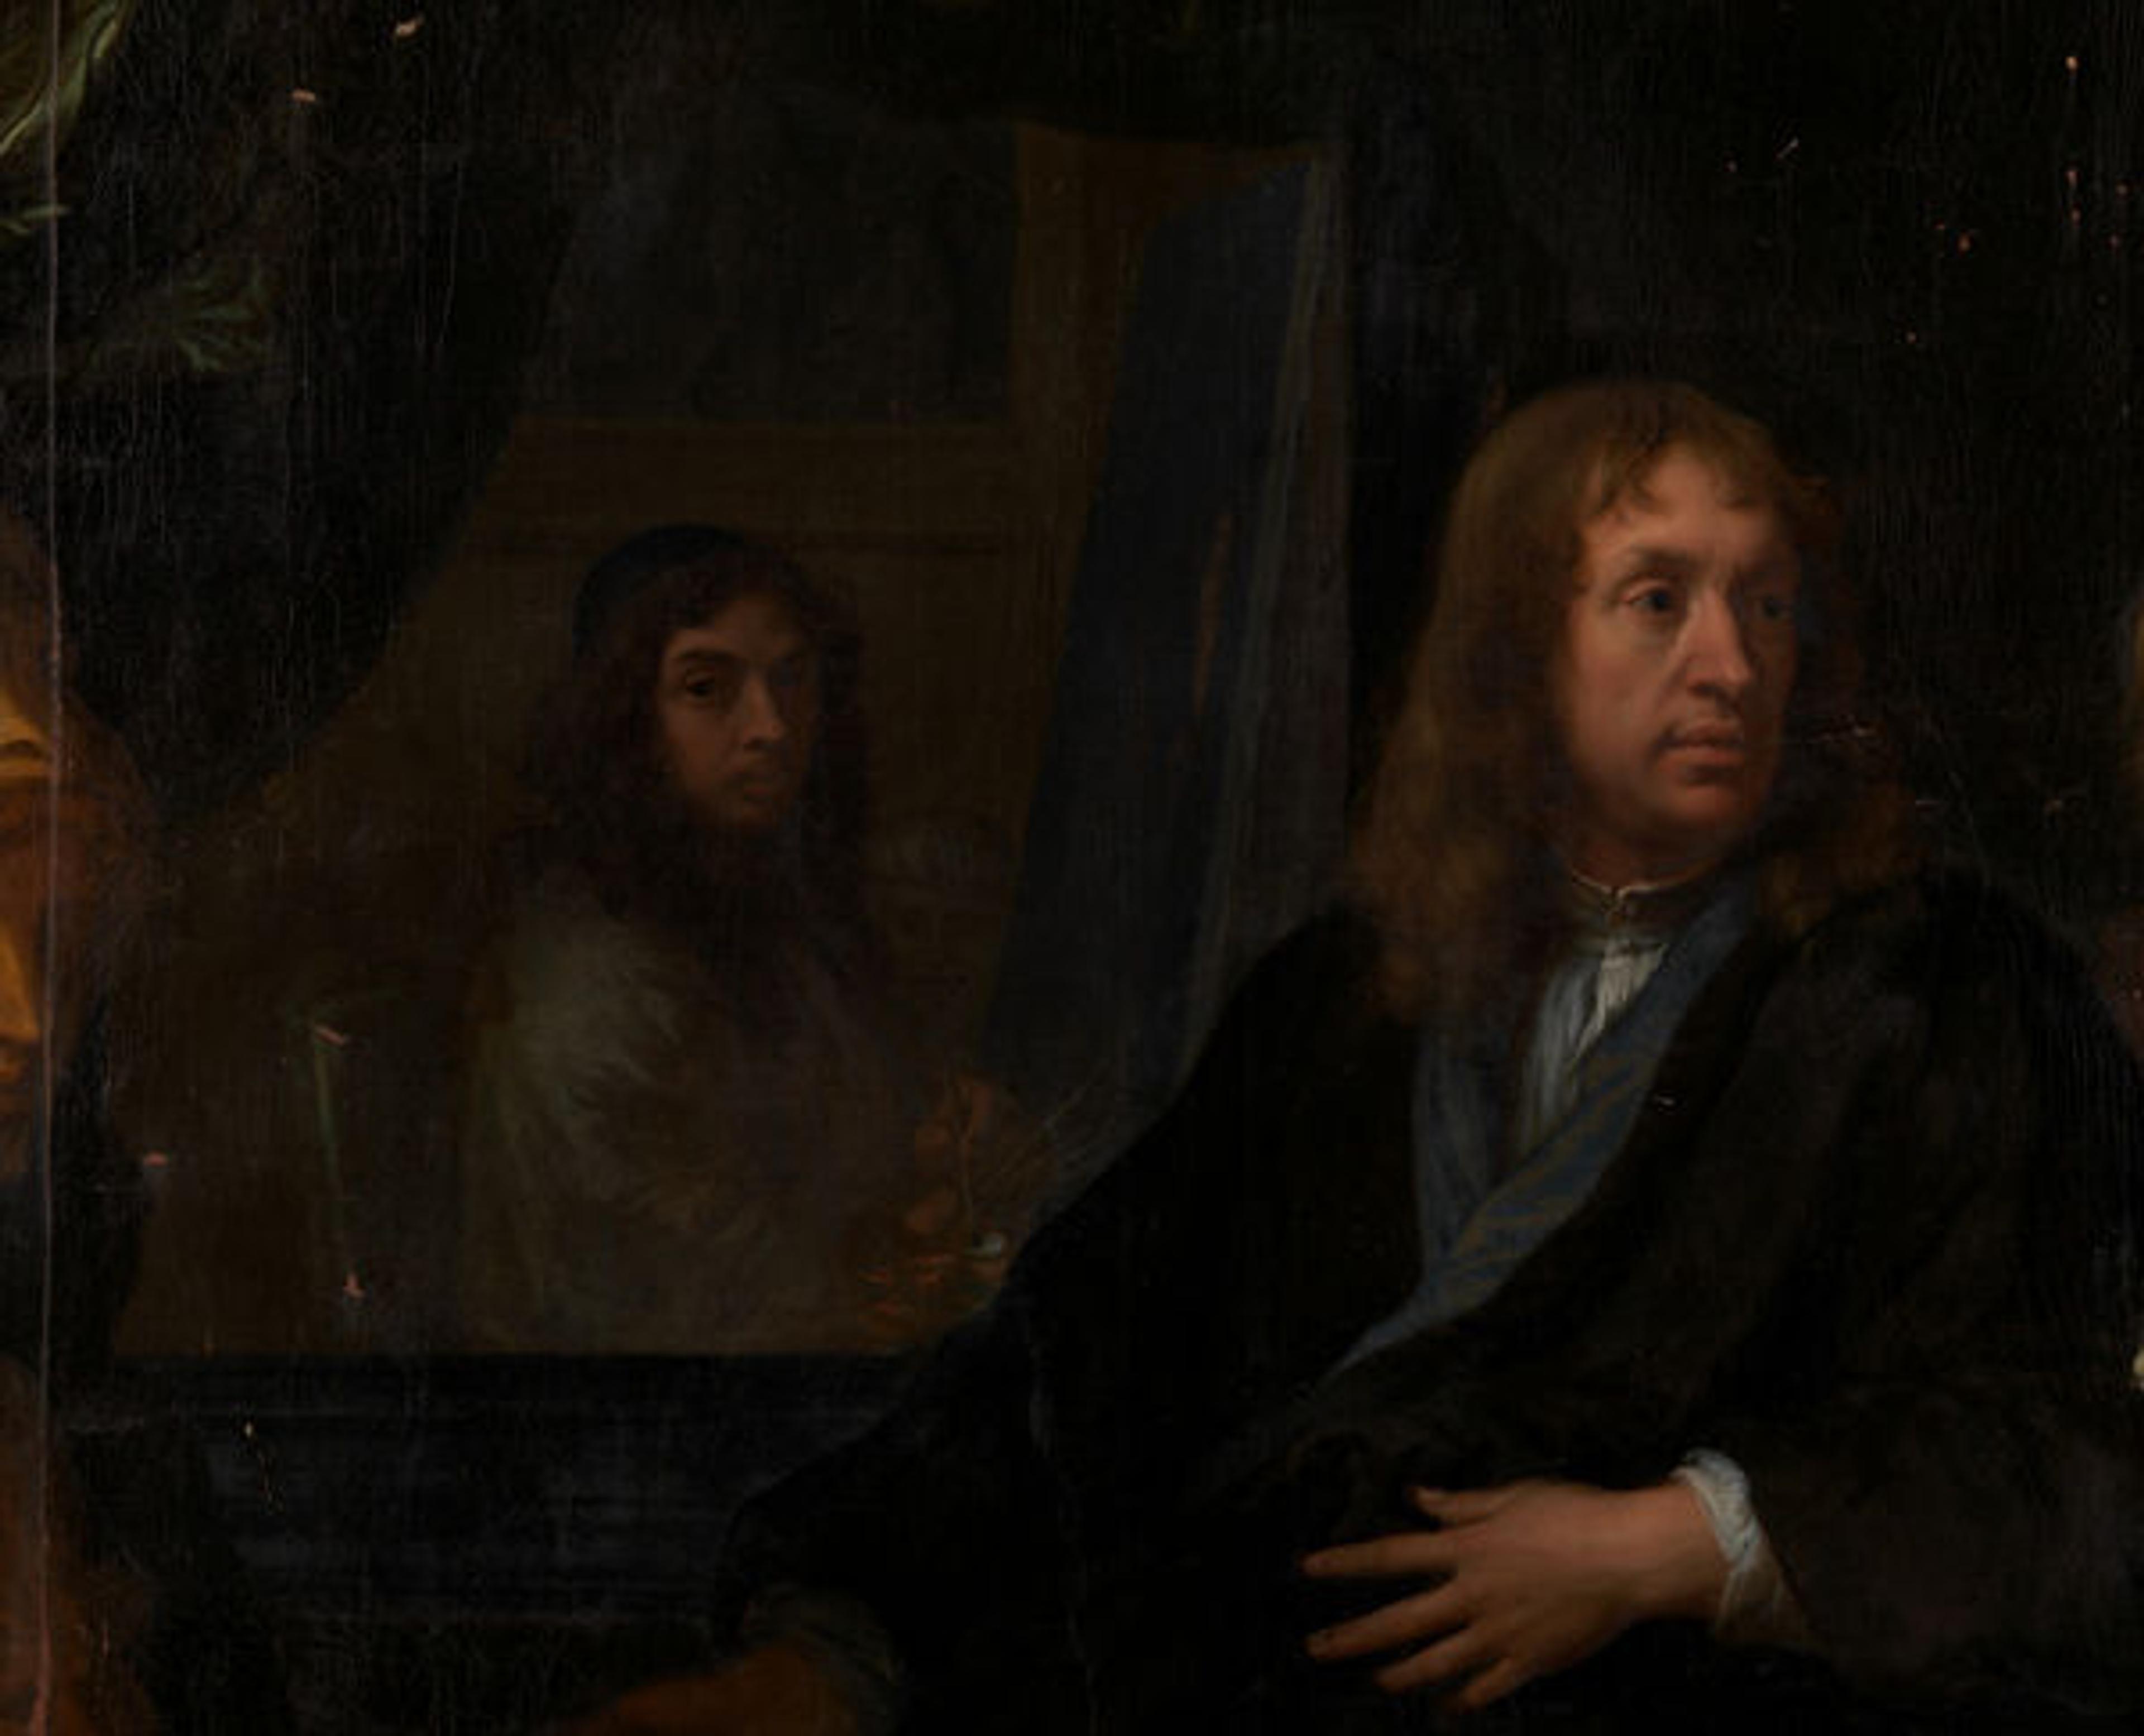 Detail of the artist reflected in a mirror